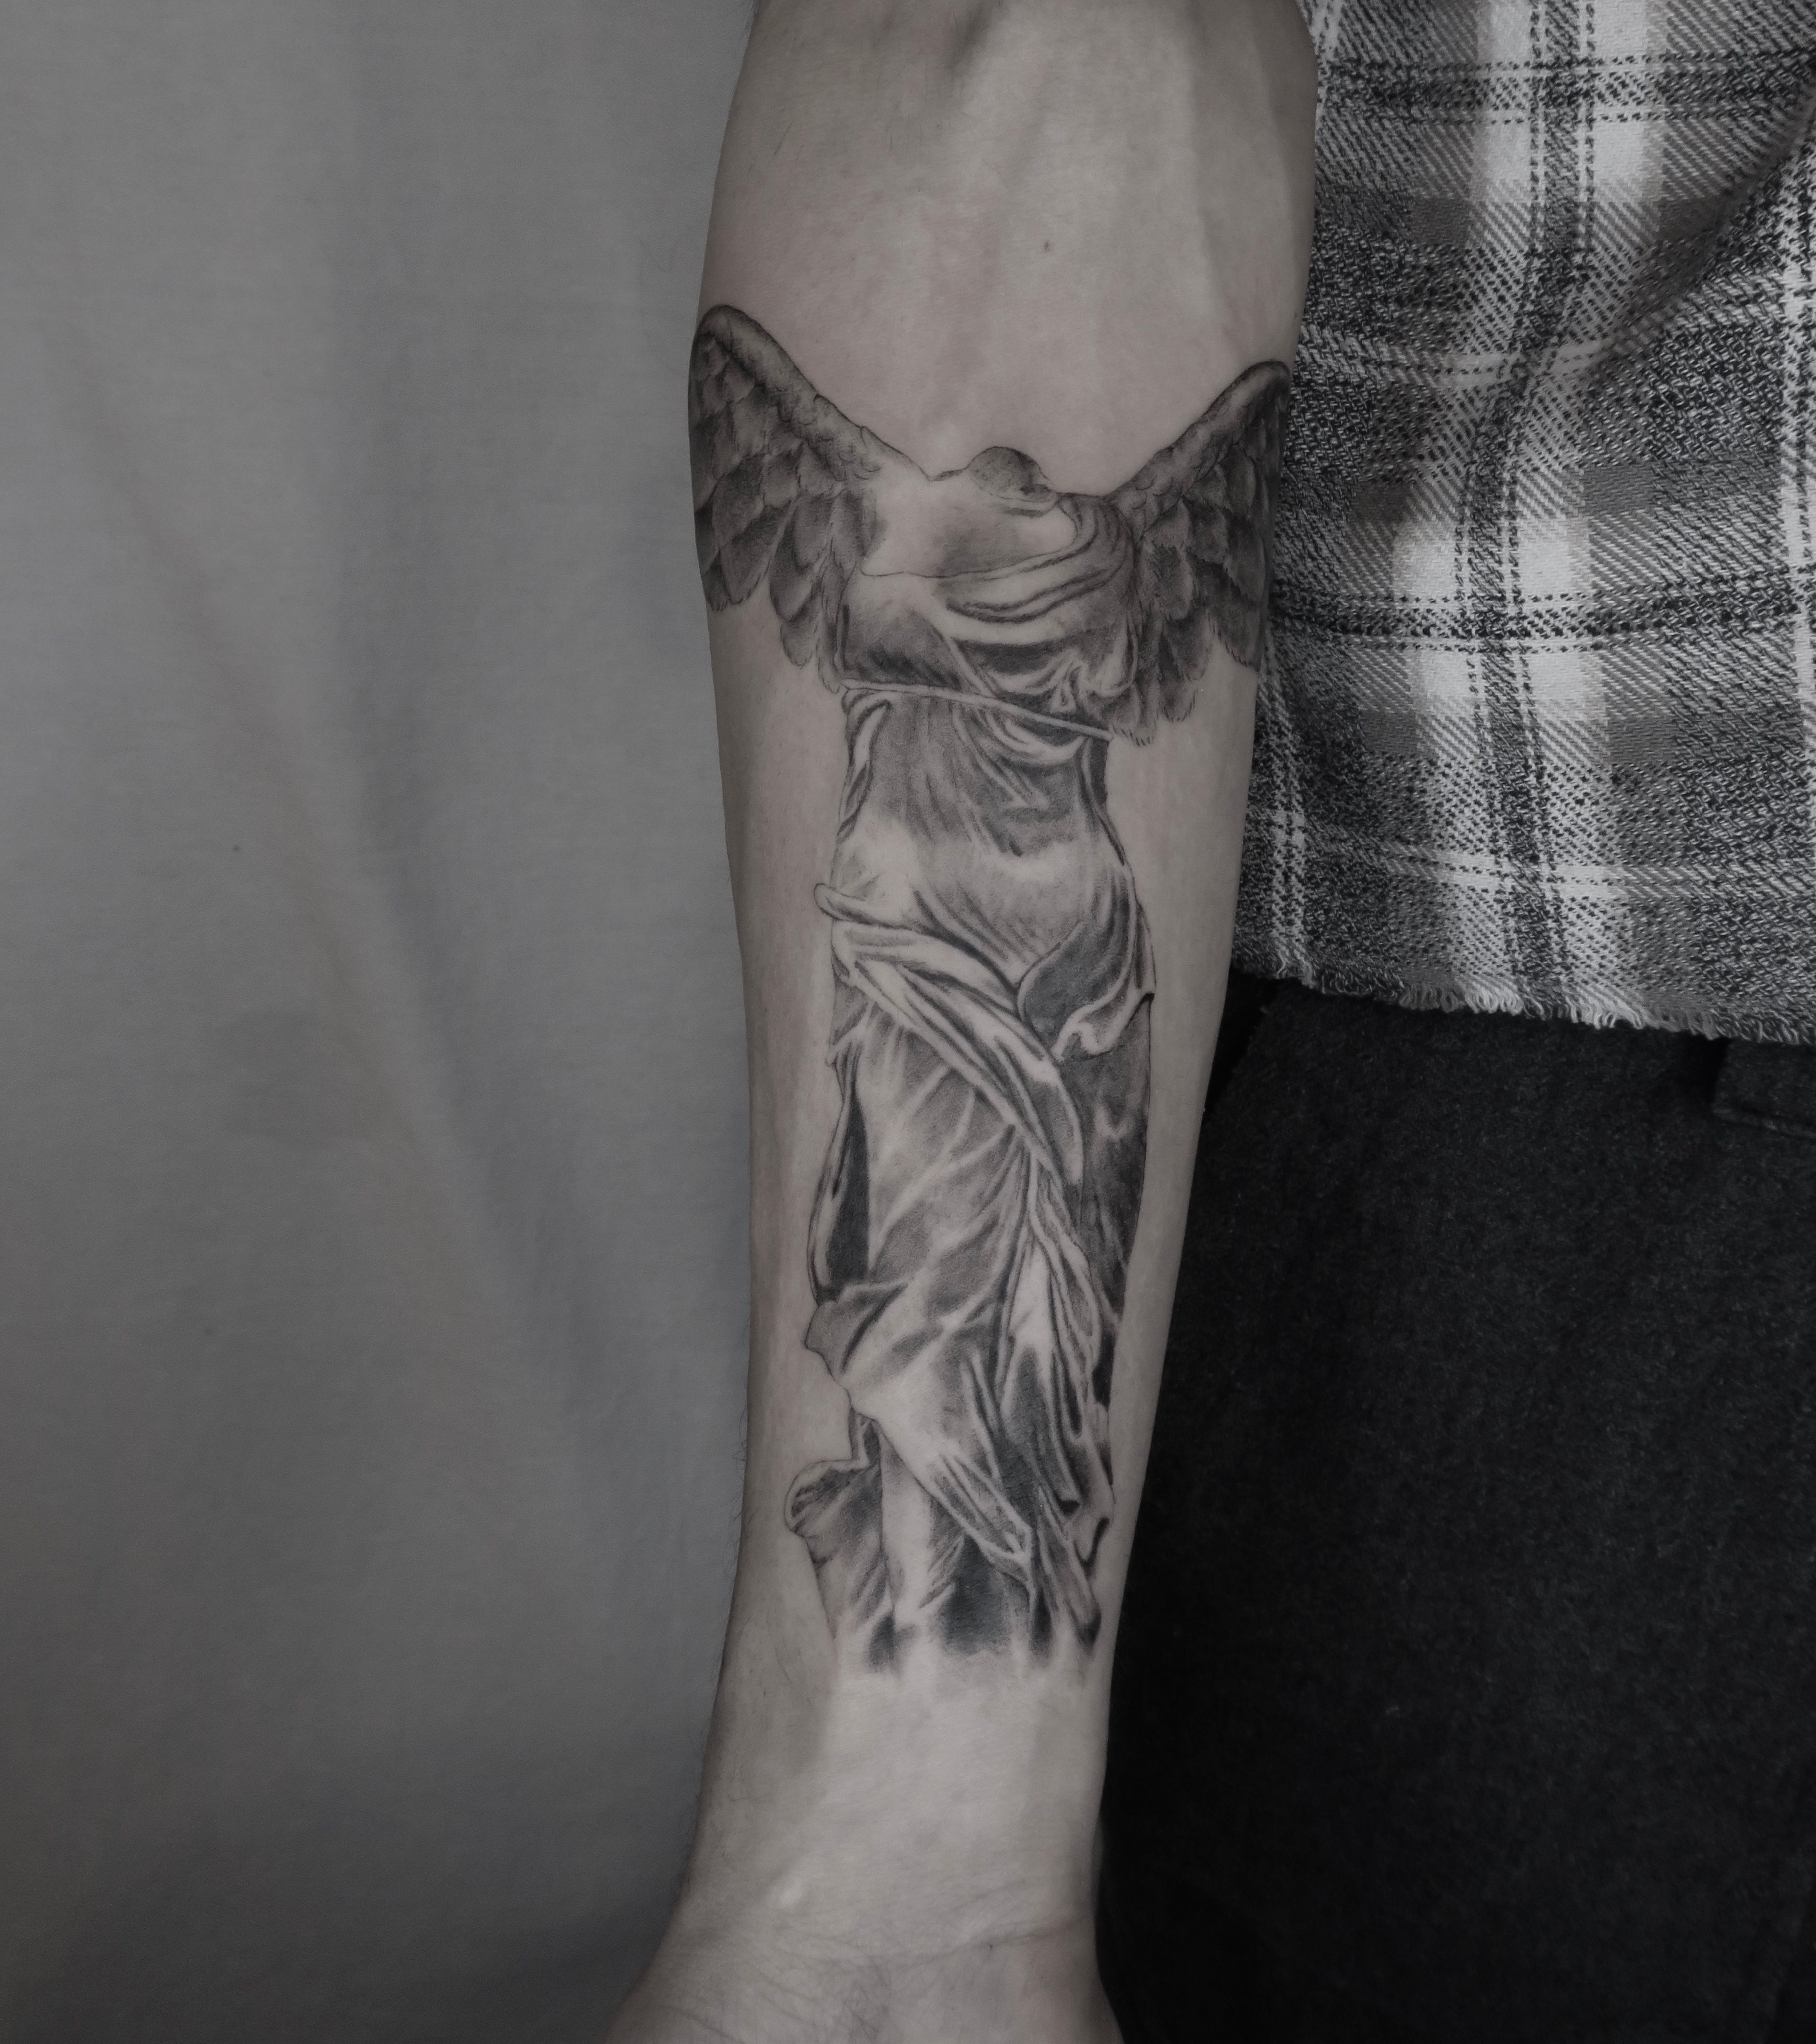 Winged victory by Winter at Brotherhood tattoo in Dublin Ireland : r/ TattooDesigns